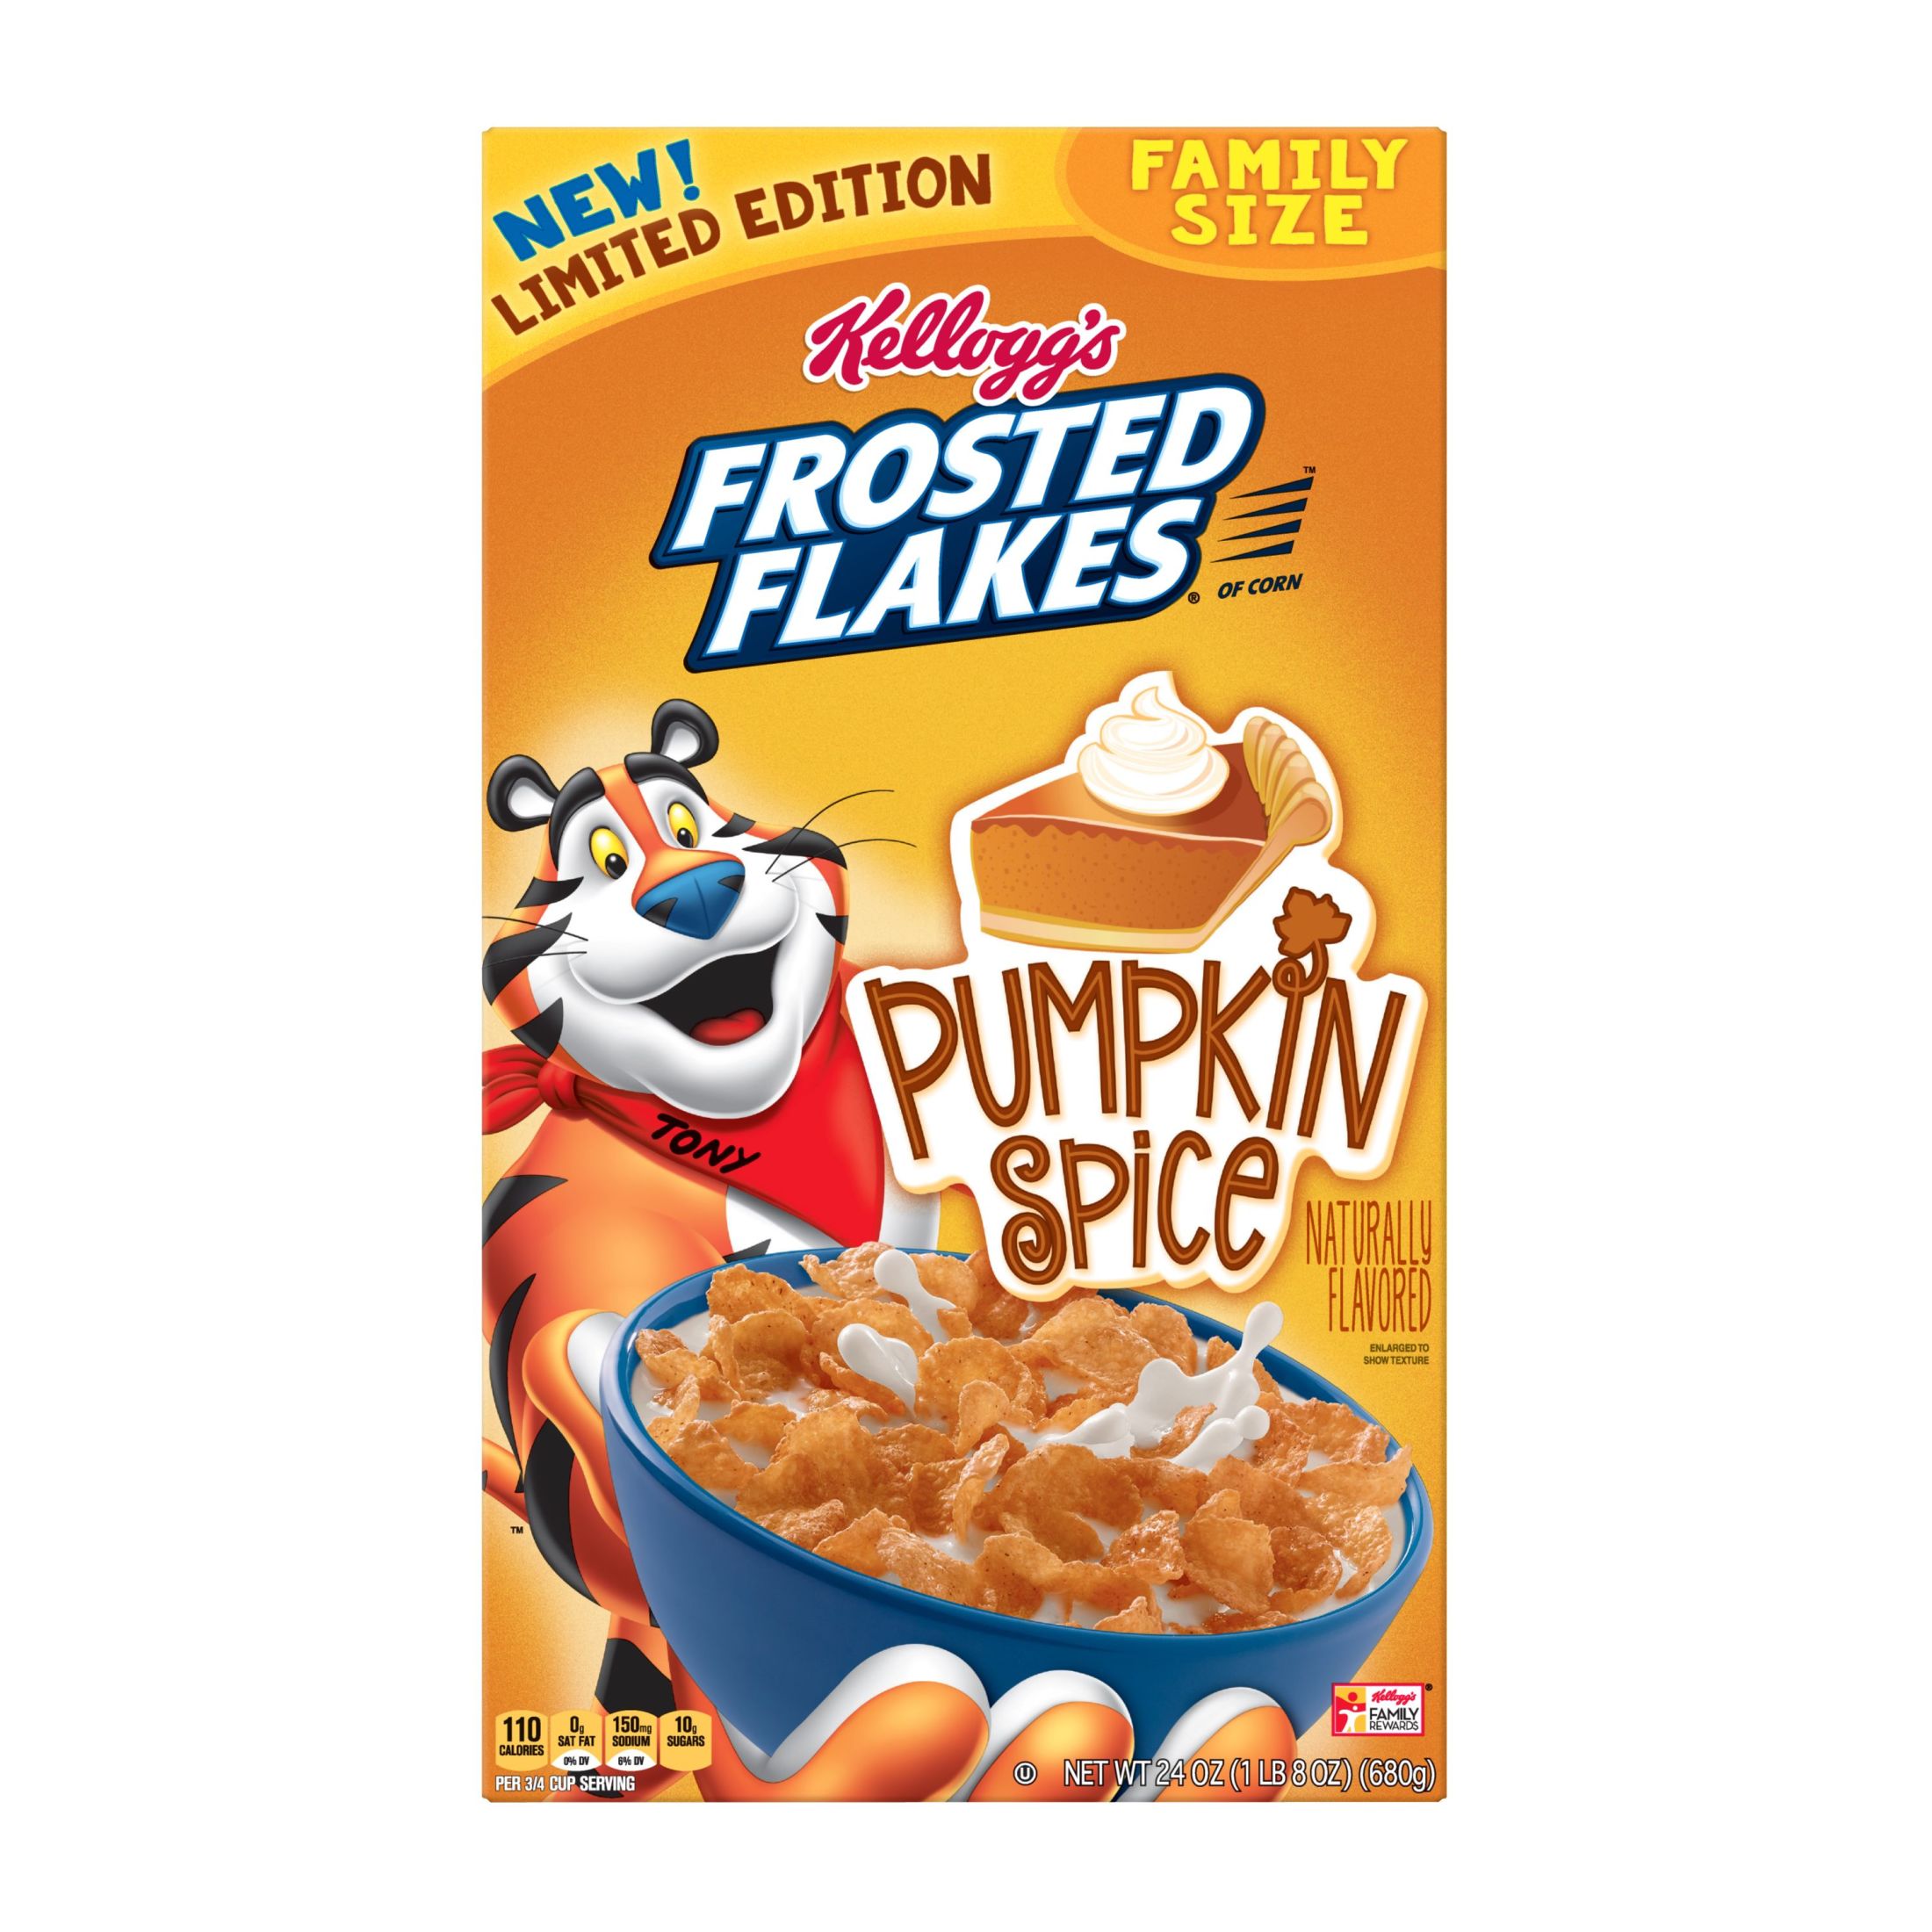 Kellogg's Frosted Flakes Pumpkin Spice Cold Breakfast Cereal, Family Size, 24 oz Box - image 3 of 8